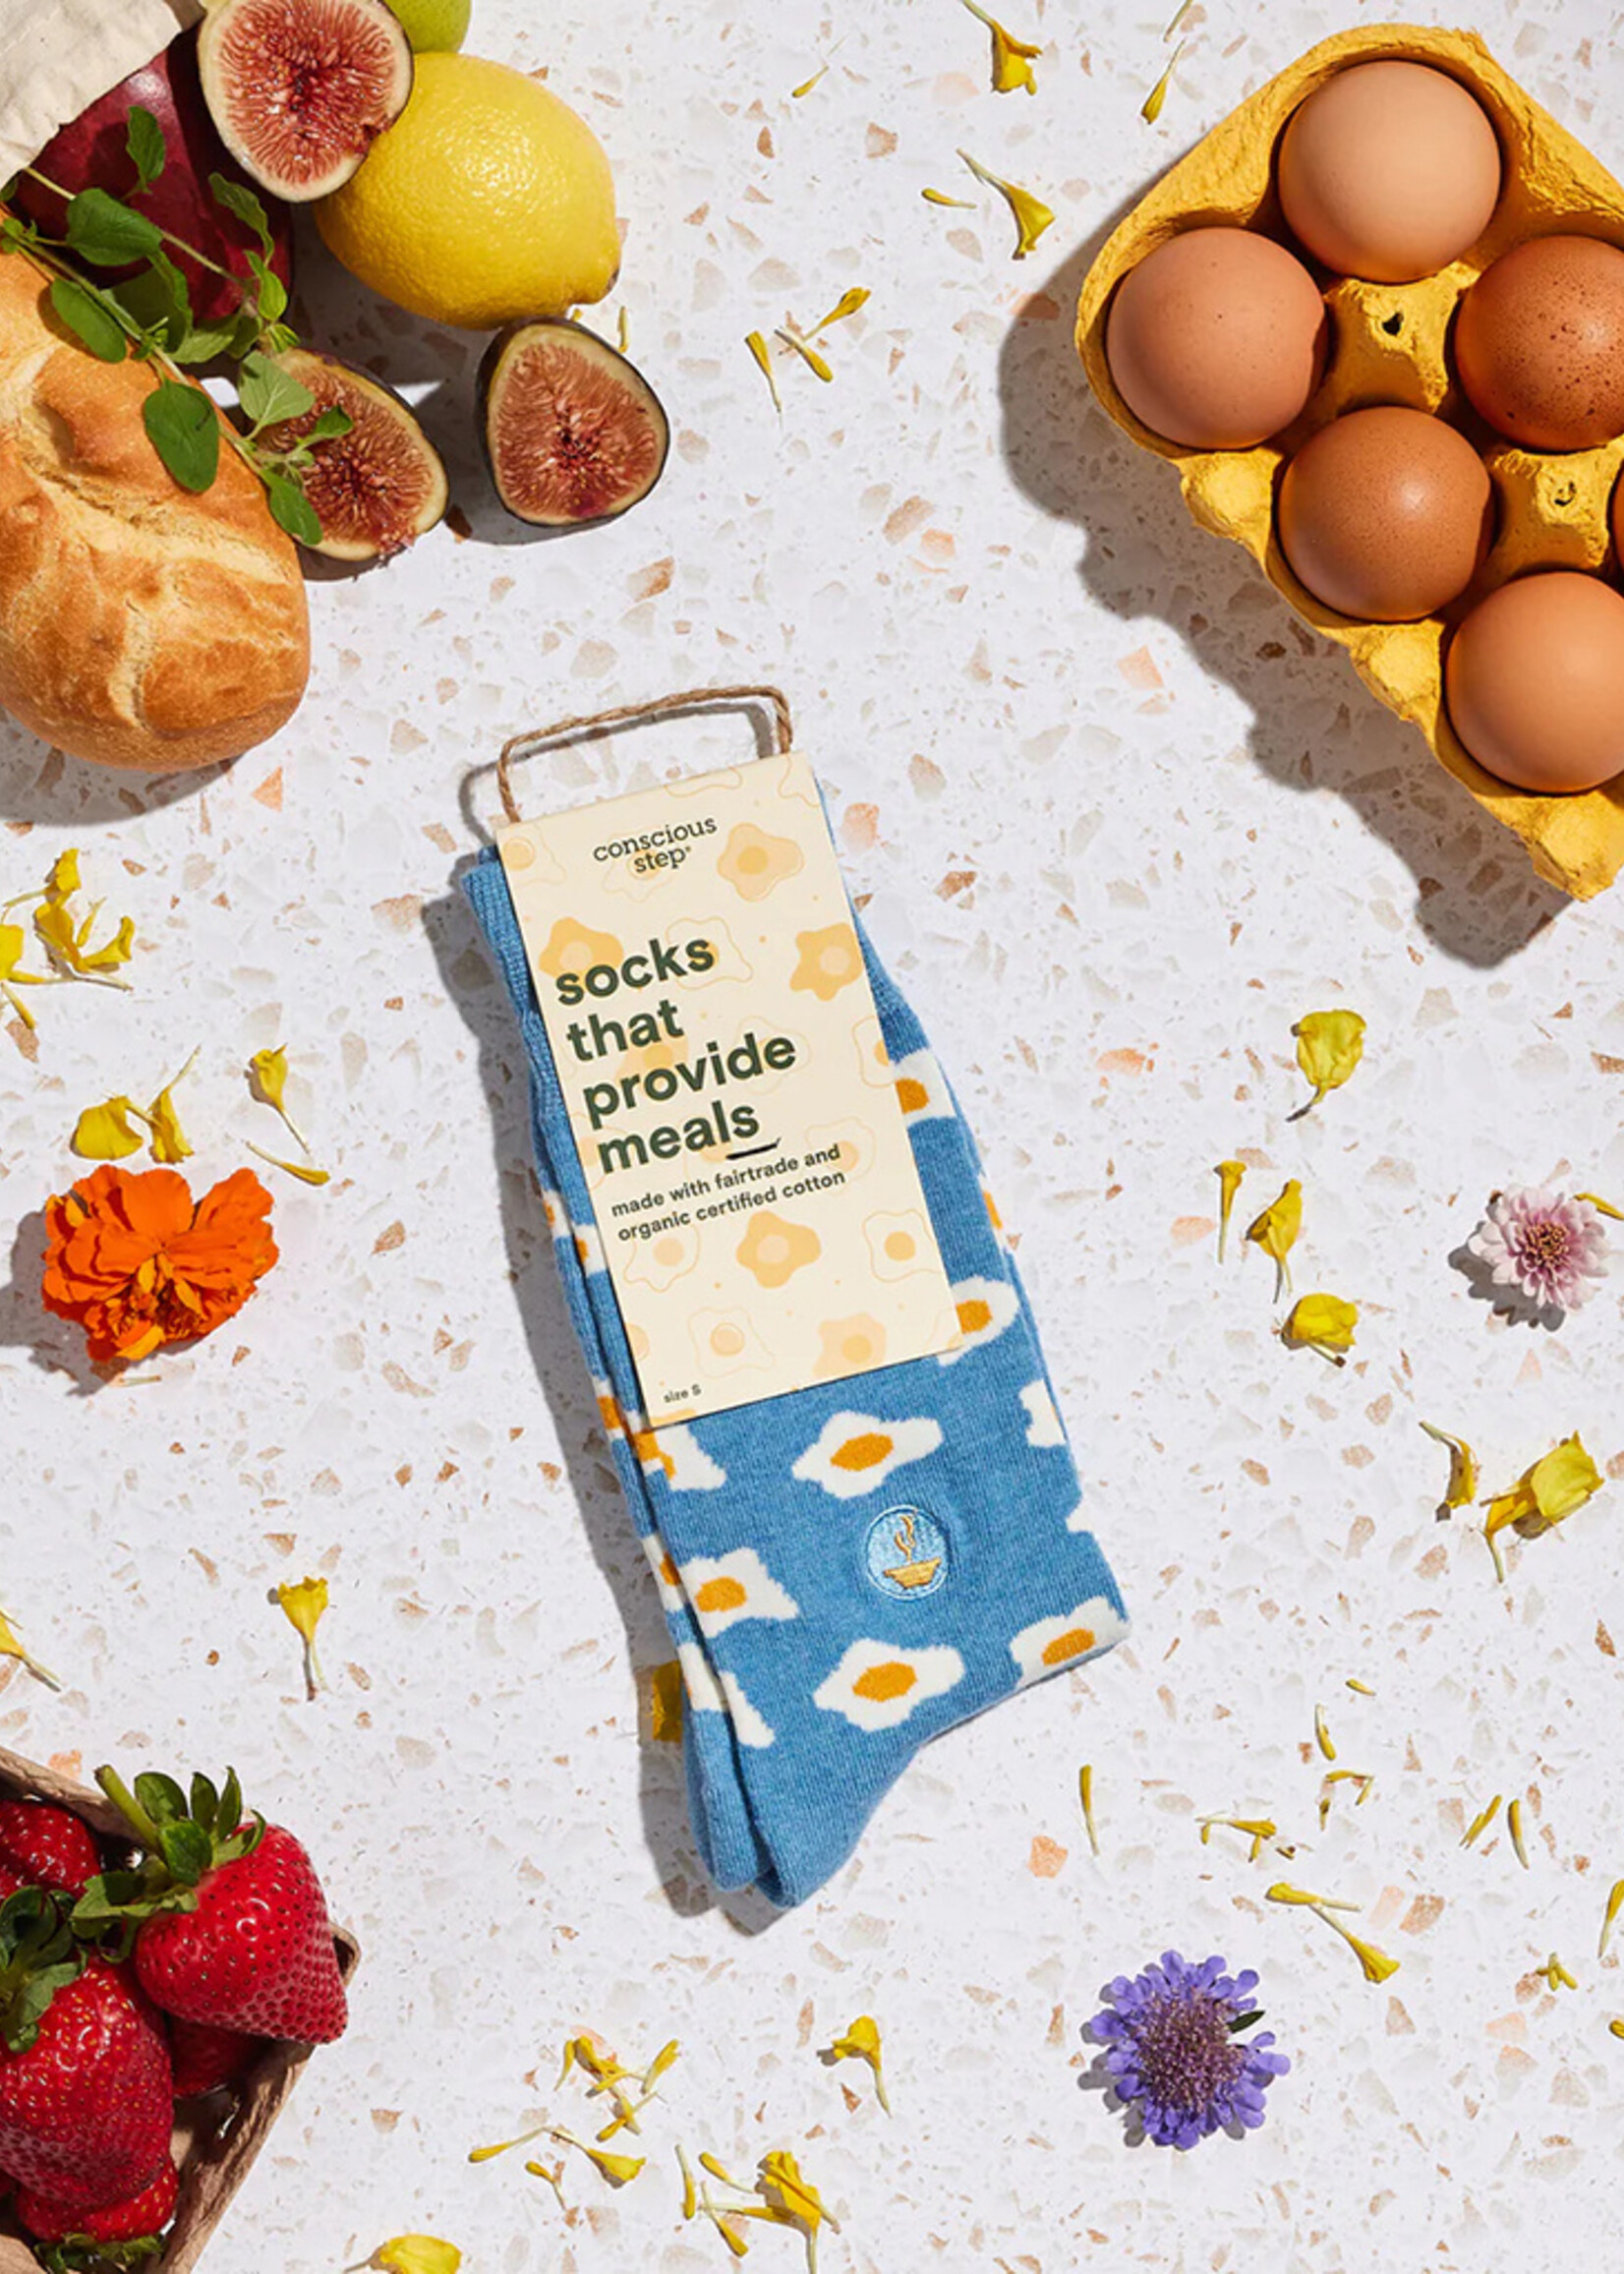 Conscious Step Women's Egg Socks that Provide Meals